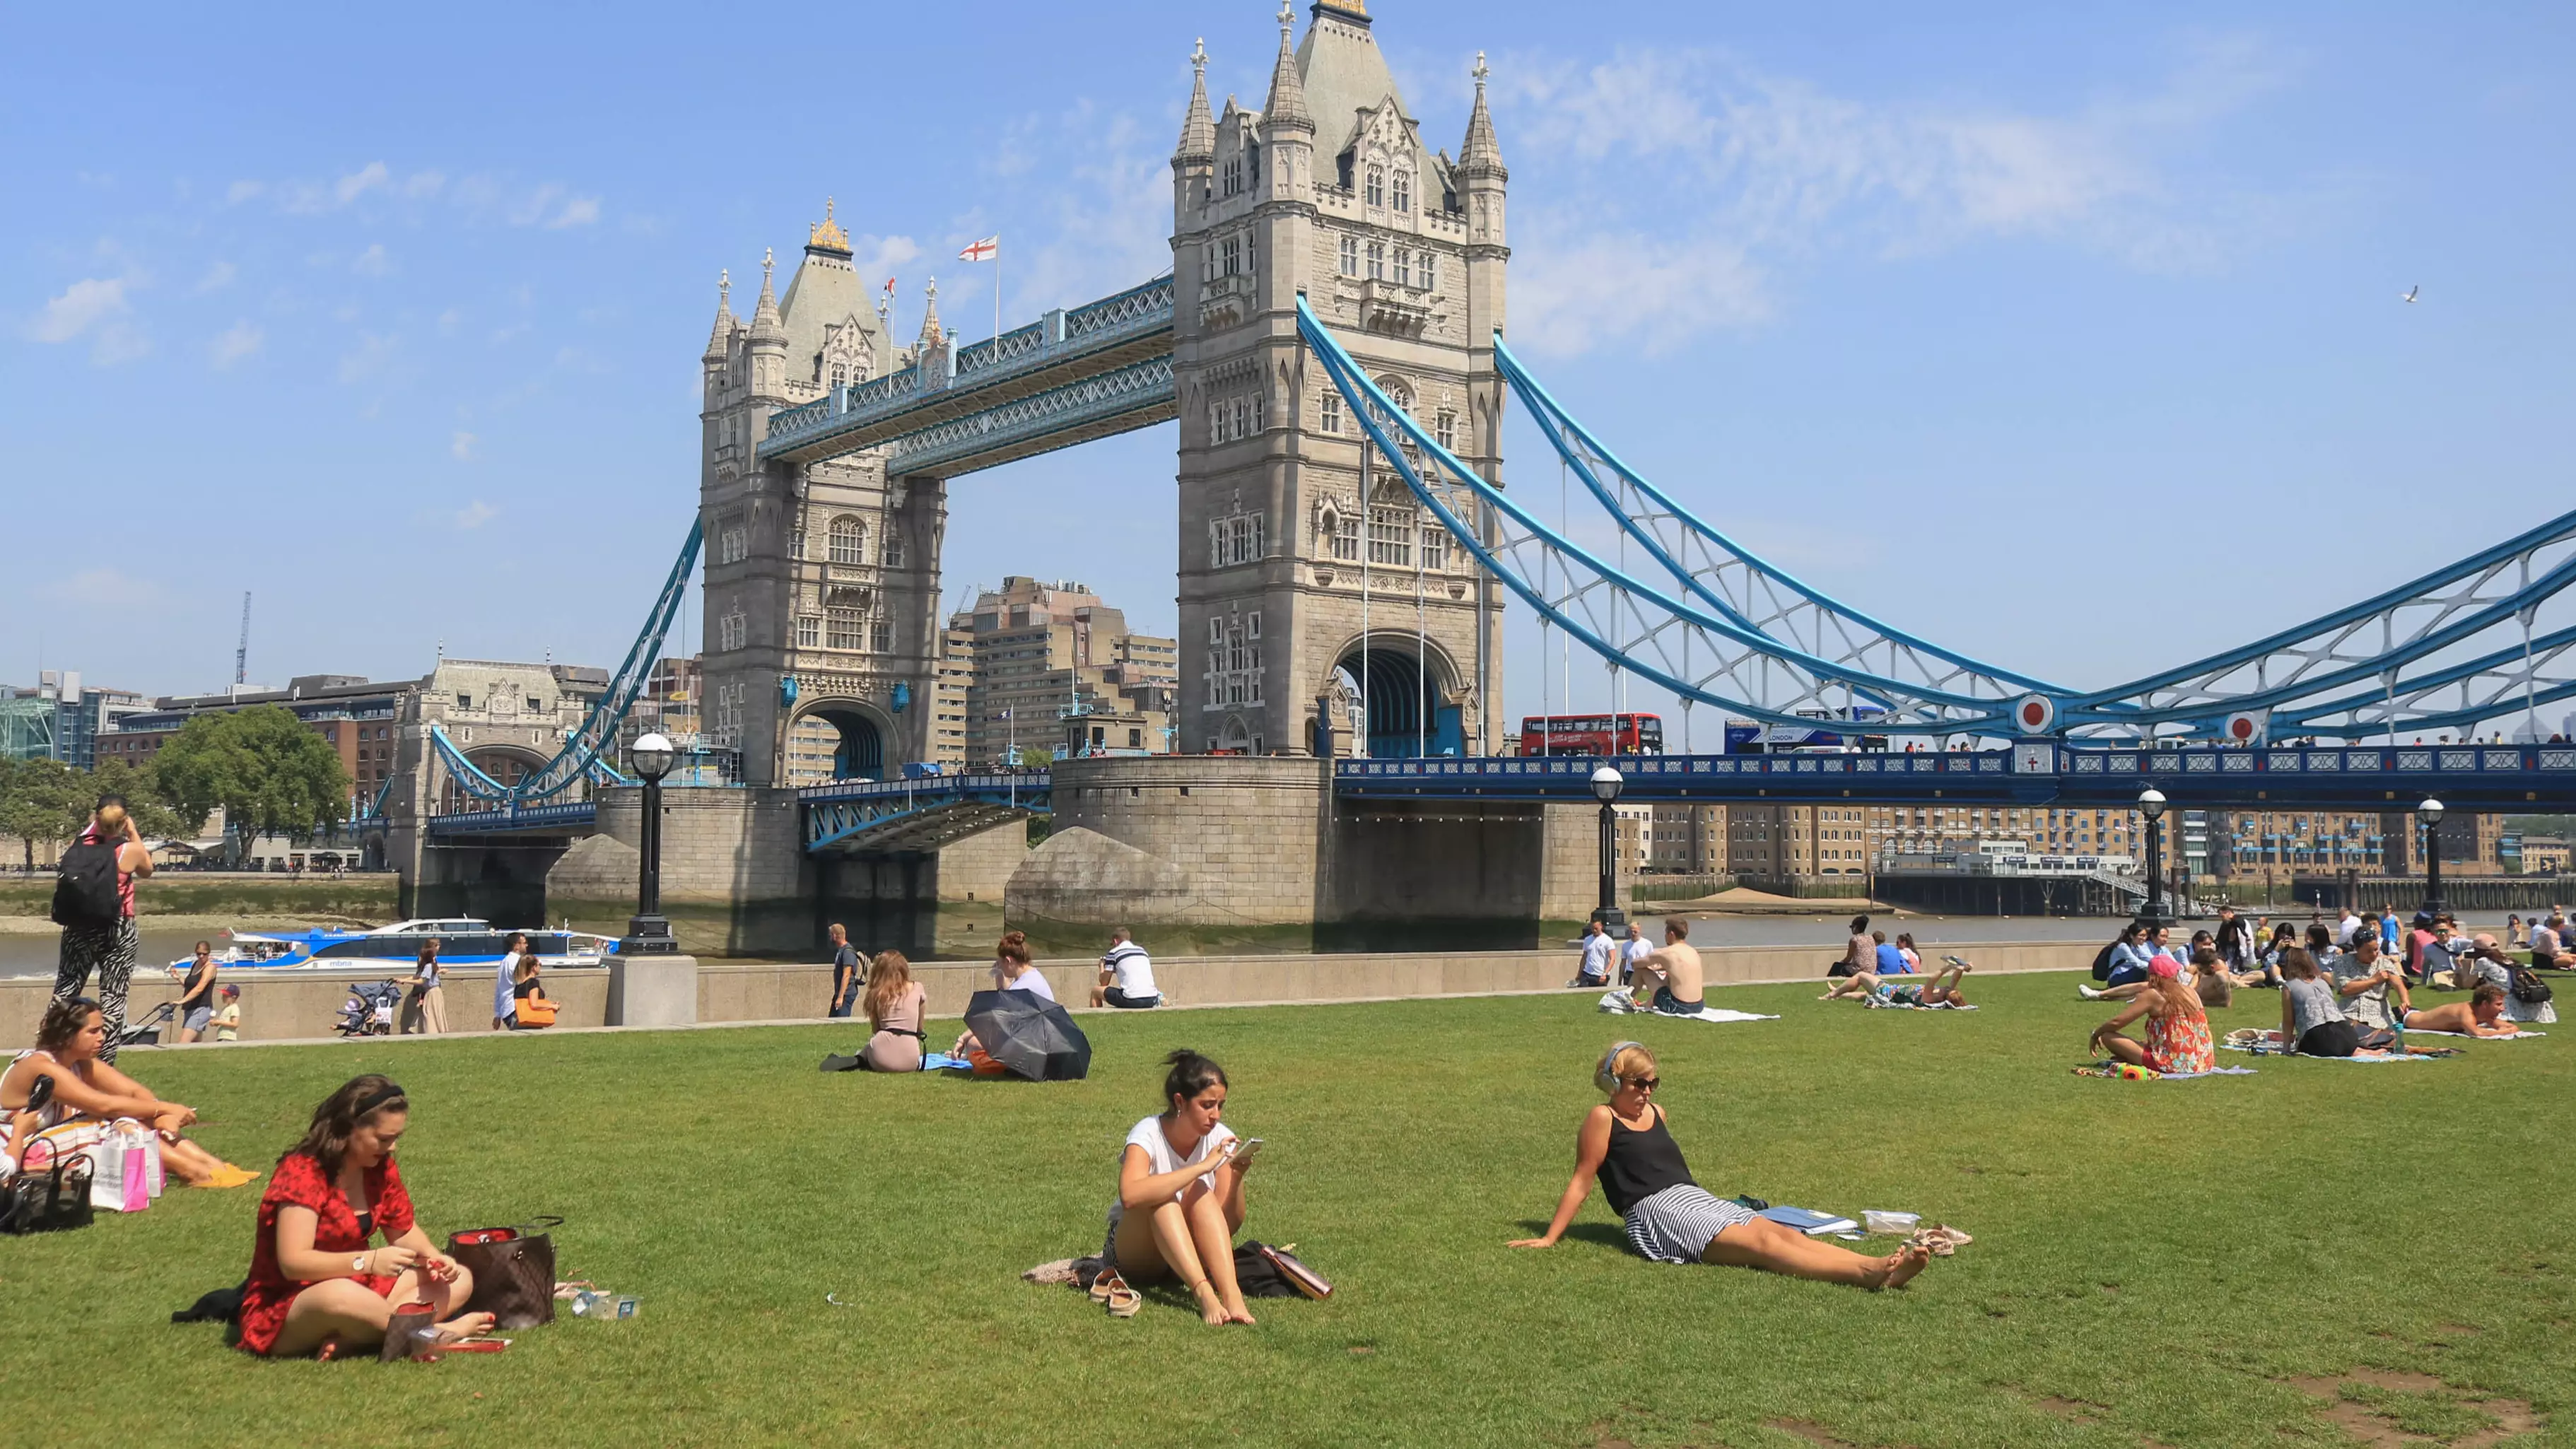 Warm Weather To Hit The UK Next Week, Experts Predict 